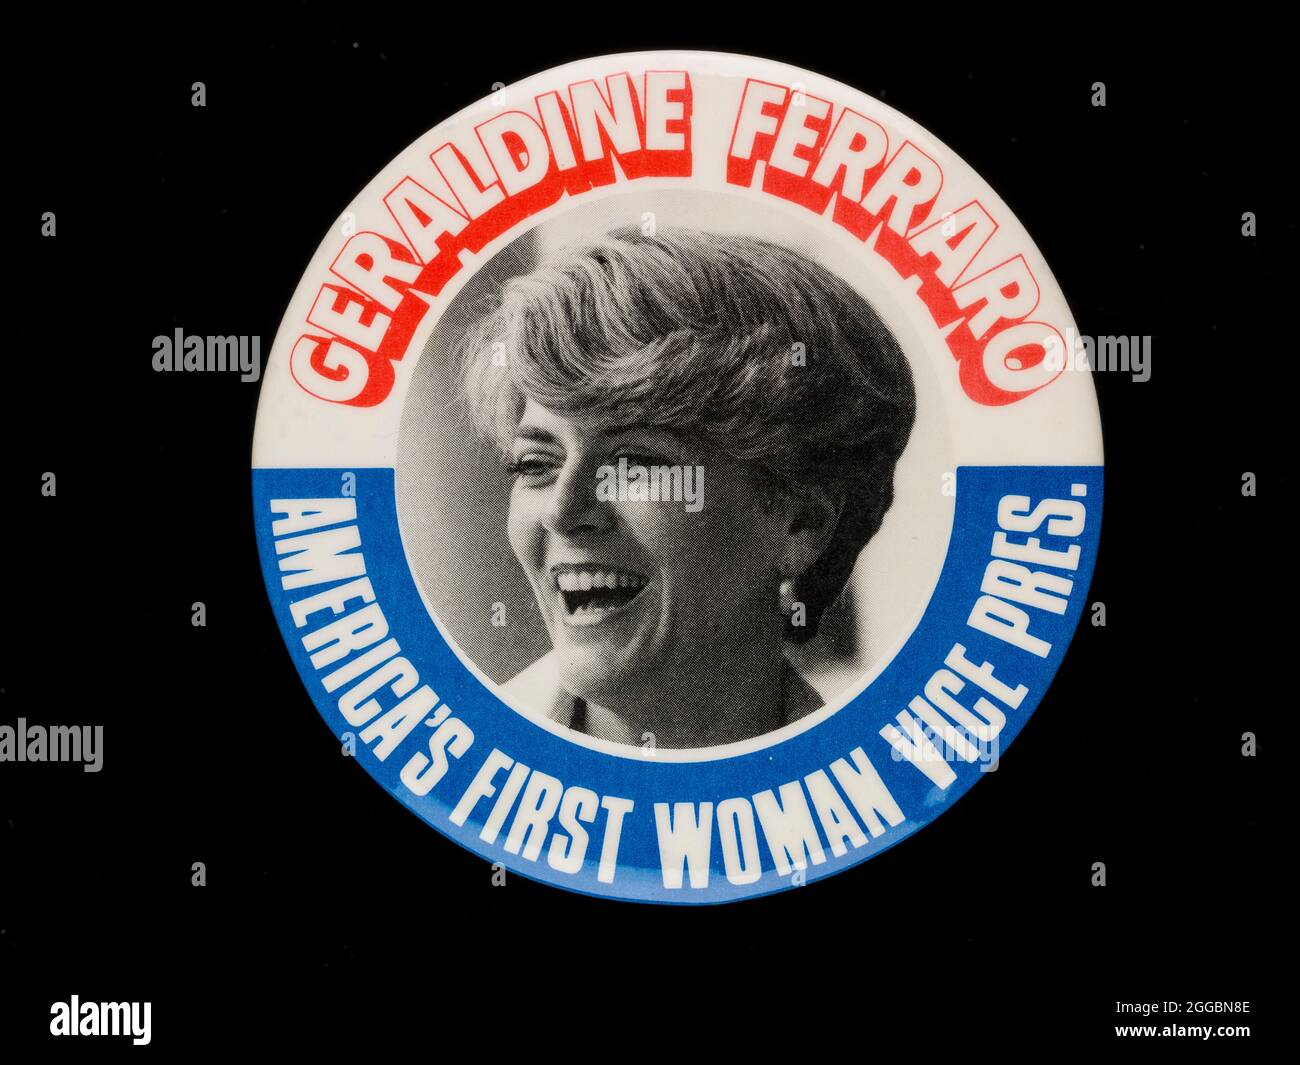 Geraldine Ferraro badge owned by Sally Ride, 1984. This Geraldine Ferraro campaign button was owned by Dr. Sally K. Ride. Ferraro was Walter Mondale's running mate on the Democratic ticket in the 1984 presidential election, and had she been elected, she would have been America's first woman Vice President. During her acceptance speech at the party convention, Ferraro cited Sally Ride's achievement as the first American woman in space as evidence that &quot;change is in the air.&quot; Stock Photo